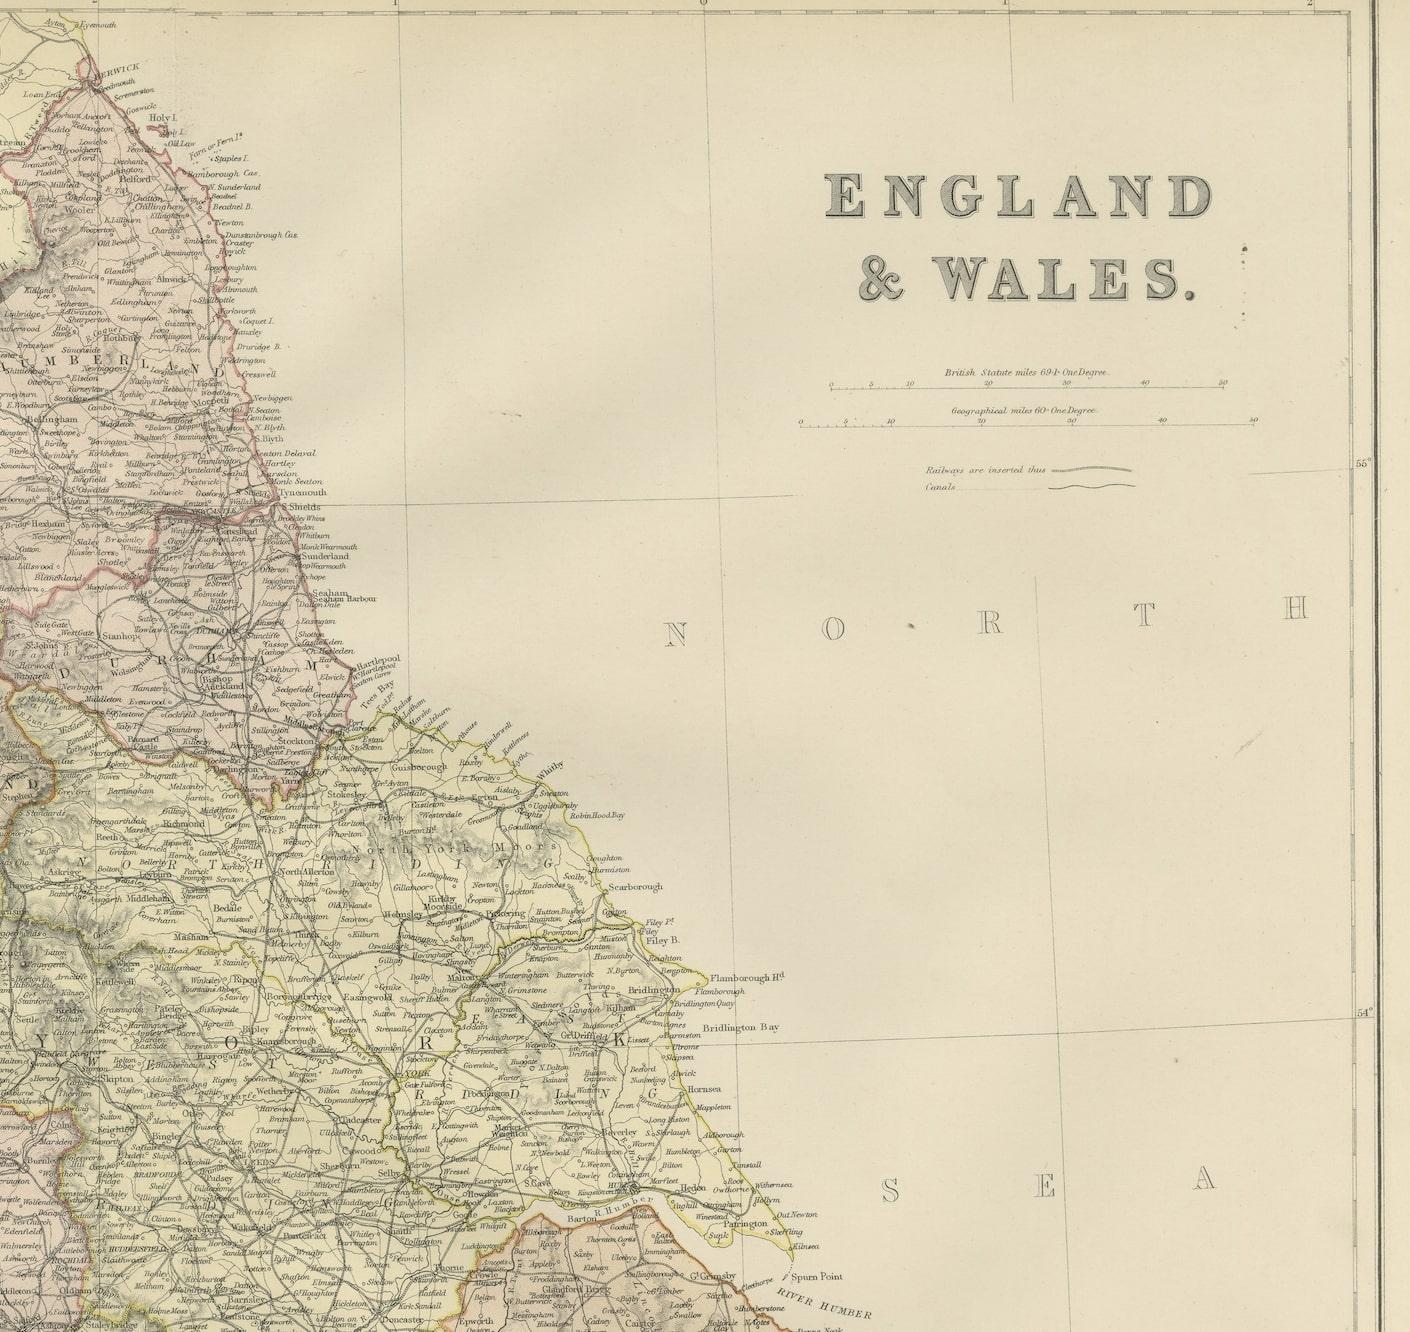 Explore the Historic Splendor of 'England and Wales' with this Antique Map! Part of a distinguished collection, this map presents a captivating view of the enchanting landscapes, cities, and historical richness of England and Wales.

Immerse